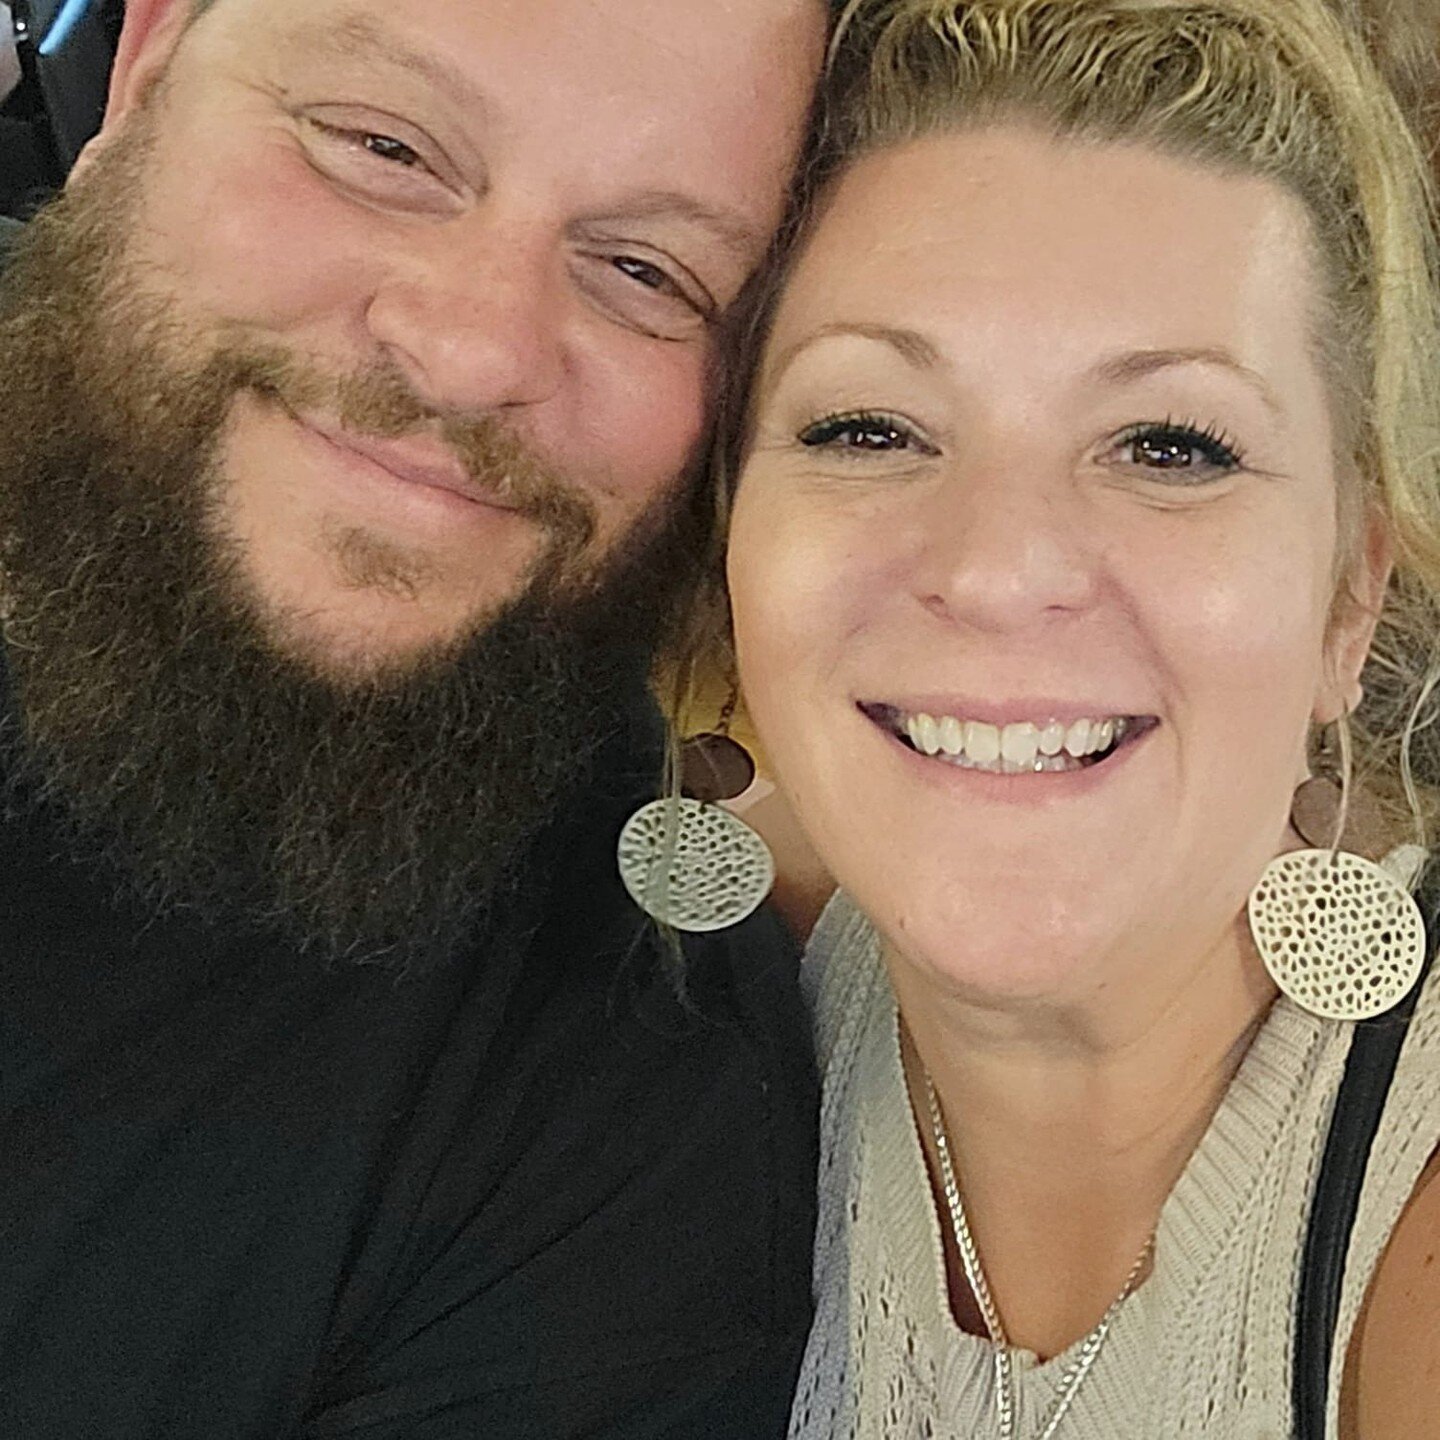 Meet the Owners, Chris and Jaime Giglio.
Chris has had the goal to own a Bar and Restaurant for longer than the 21 years we have been together. 
Shortys has always been a favorite place of ours, so when the opportunity became available....he followed